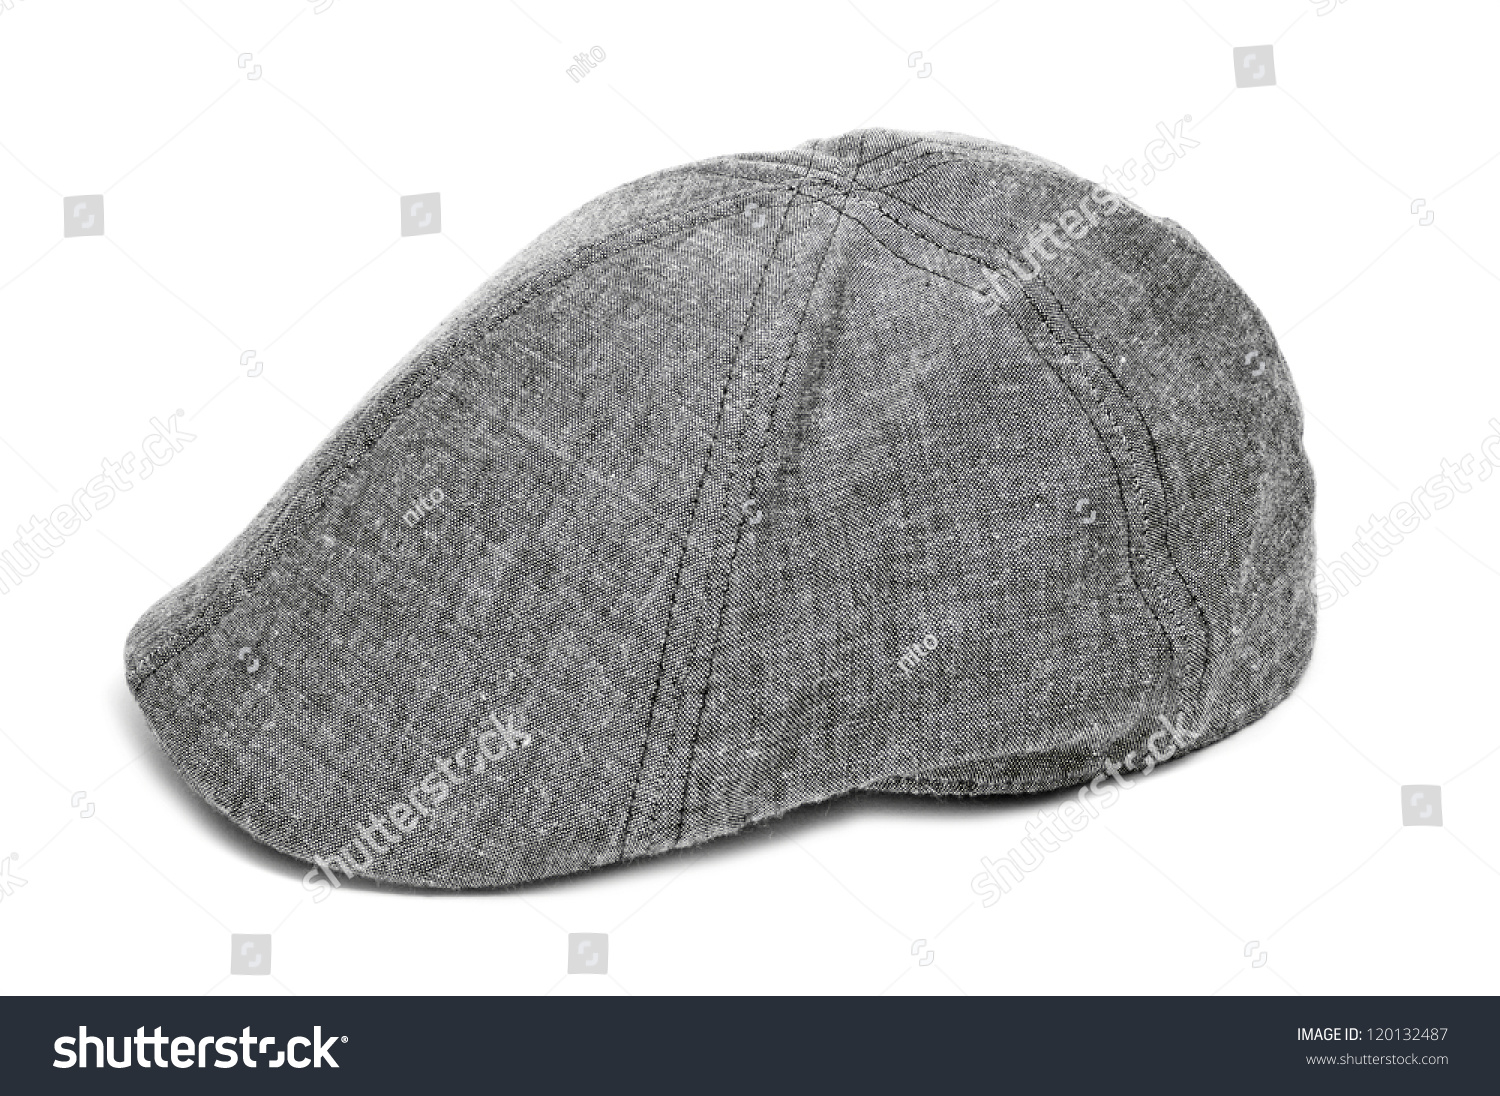 A Gray Flat Cap On A White Background Stock Photo 120132487 : Shutterstock